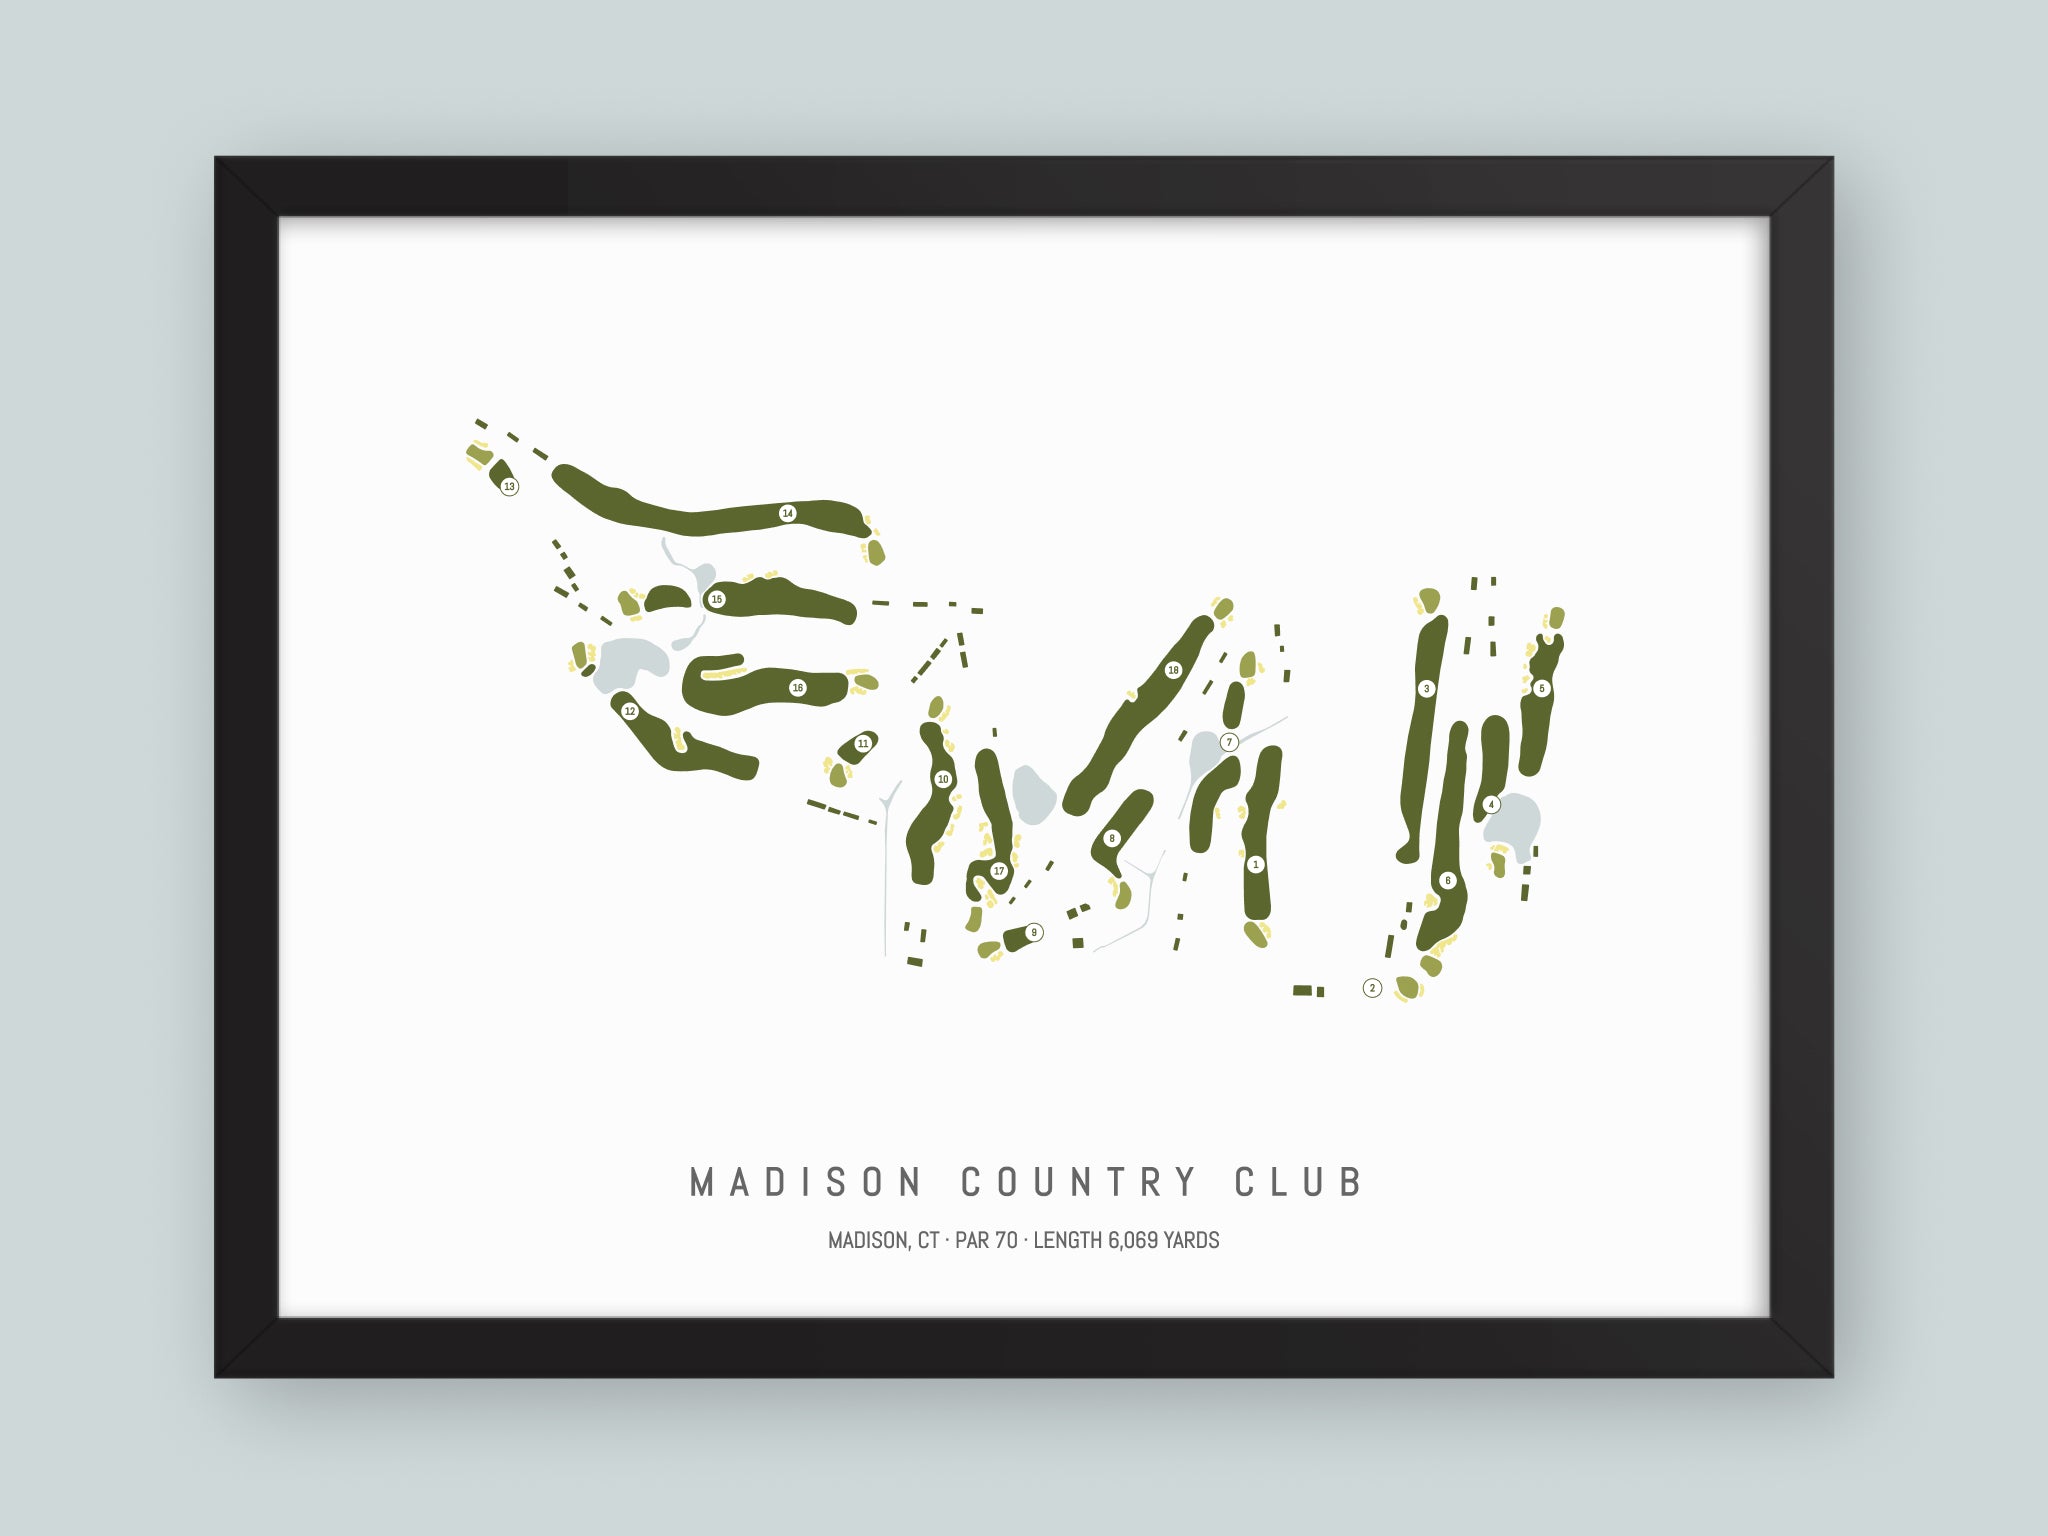 Madison-Country-Club-CT--Black-Frame-24x18-With-Hole-Numbers